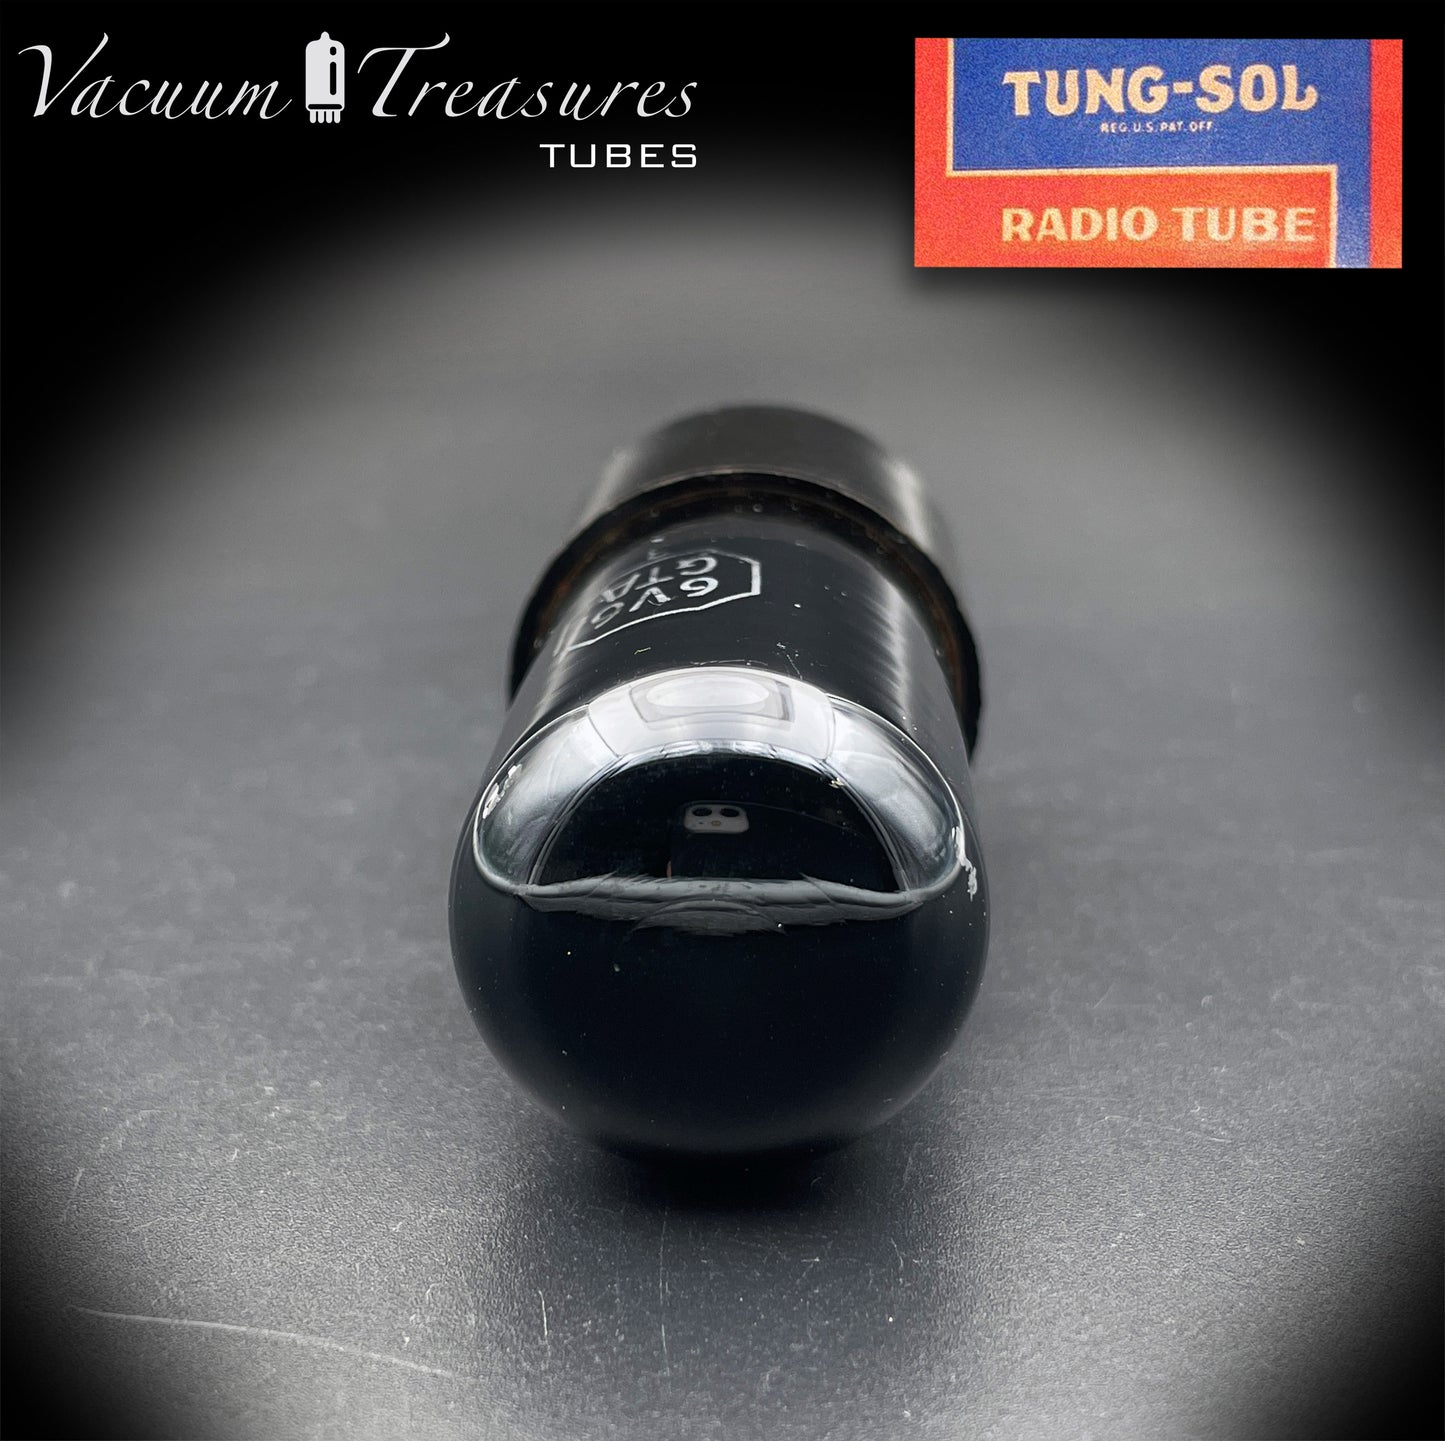 6V6 GTA TUNG-SOL Black Glass D Getter Tested Tube MADE IN USA